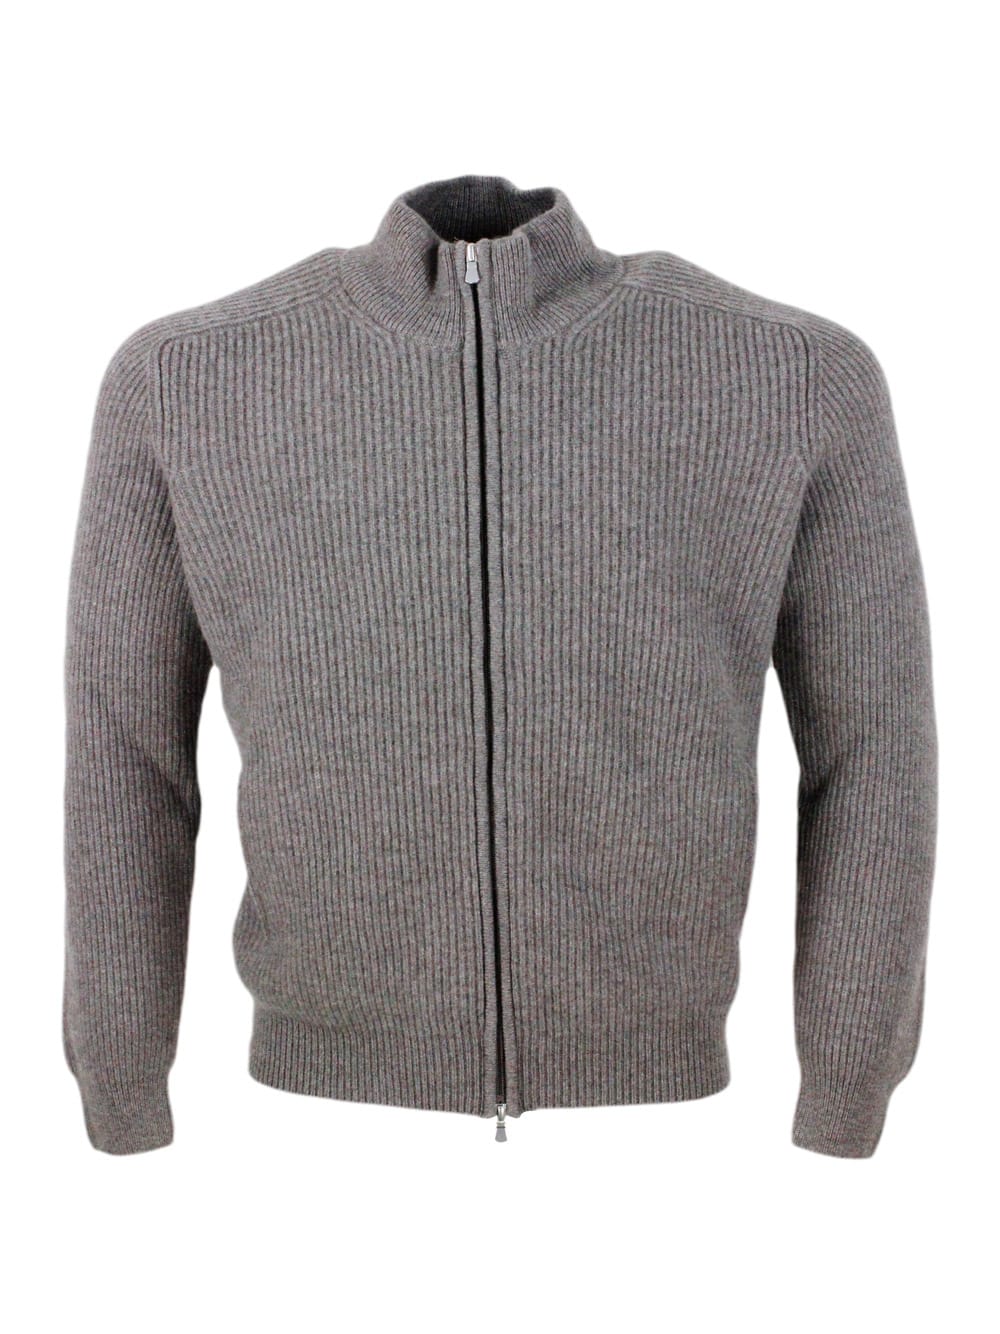 Long-sleeved Full-zip Sweater In Soft And Fine Cashmere With Half English Rib Knit